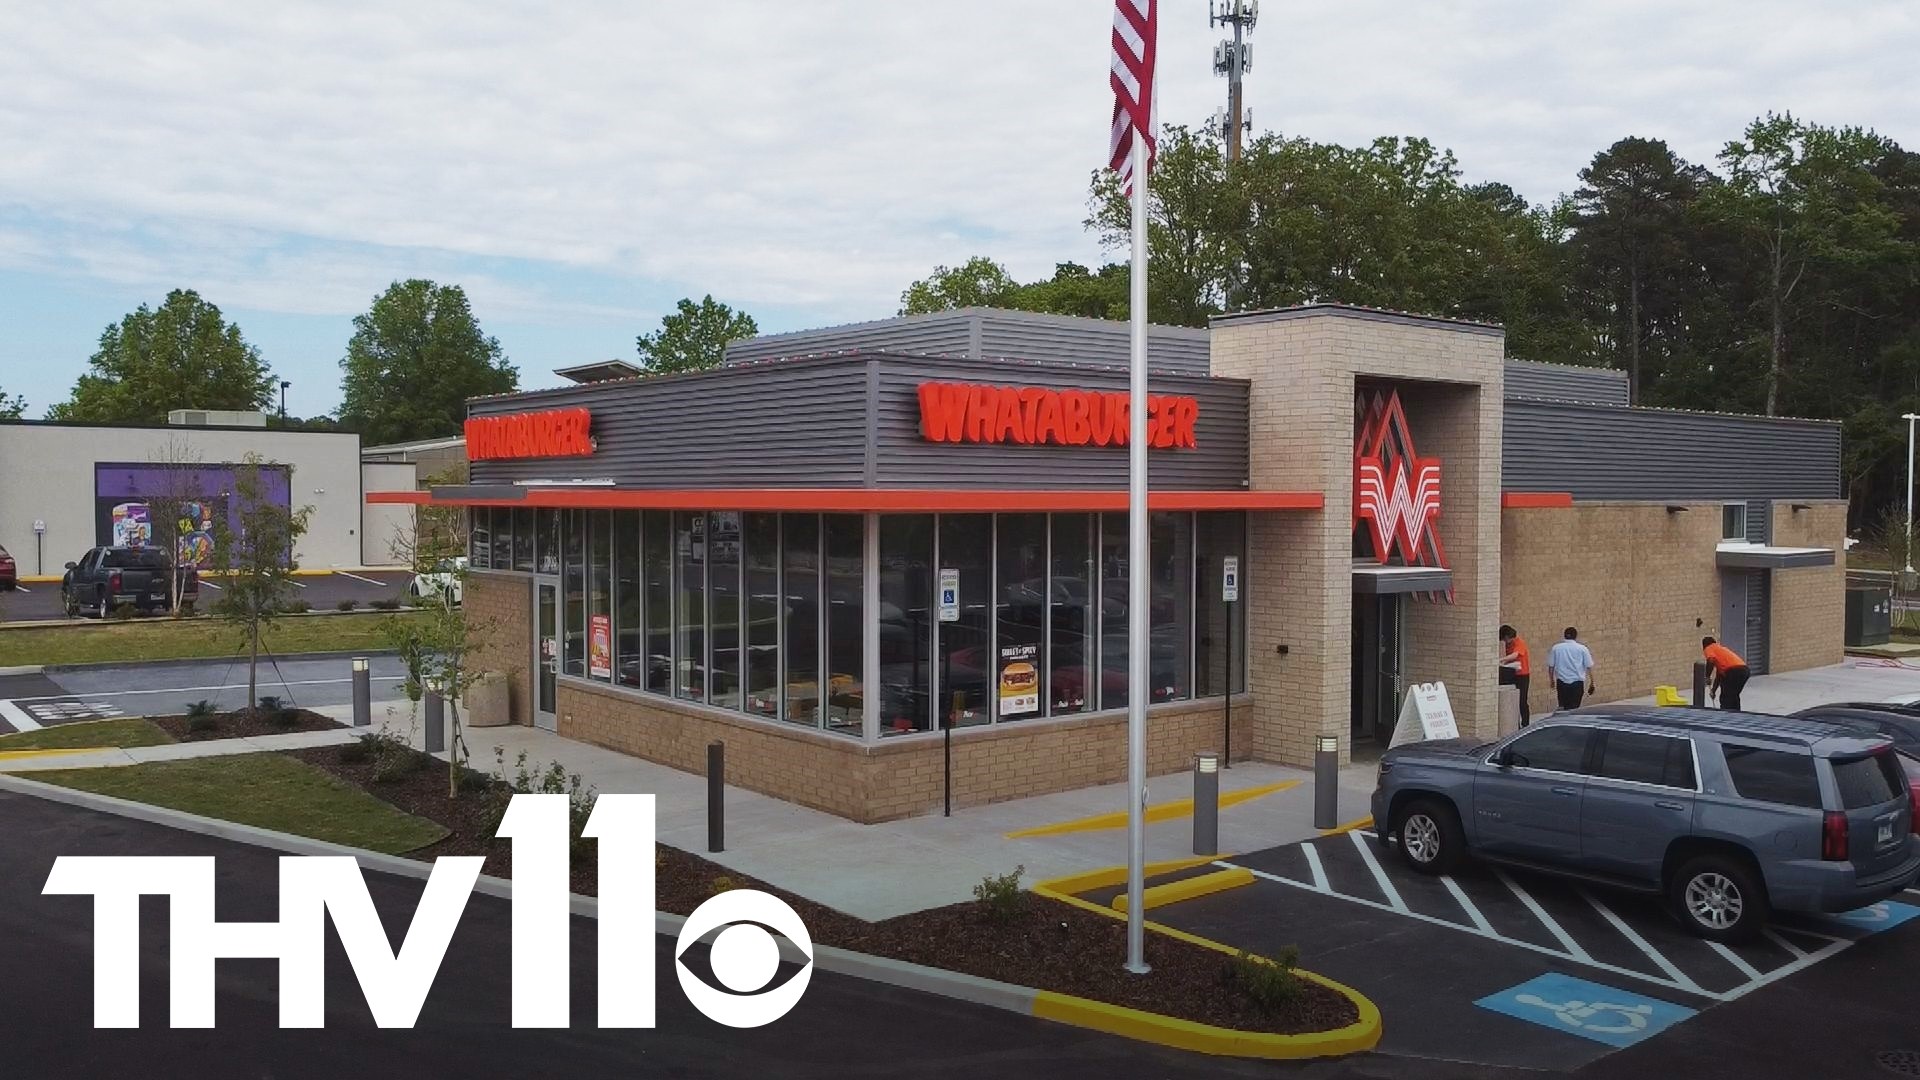 It's a moment many of us have been waiting for. The brand new Whataburger on Chenal Parkway in West Little Rock is set to open its doors on Wednesday, April 26.